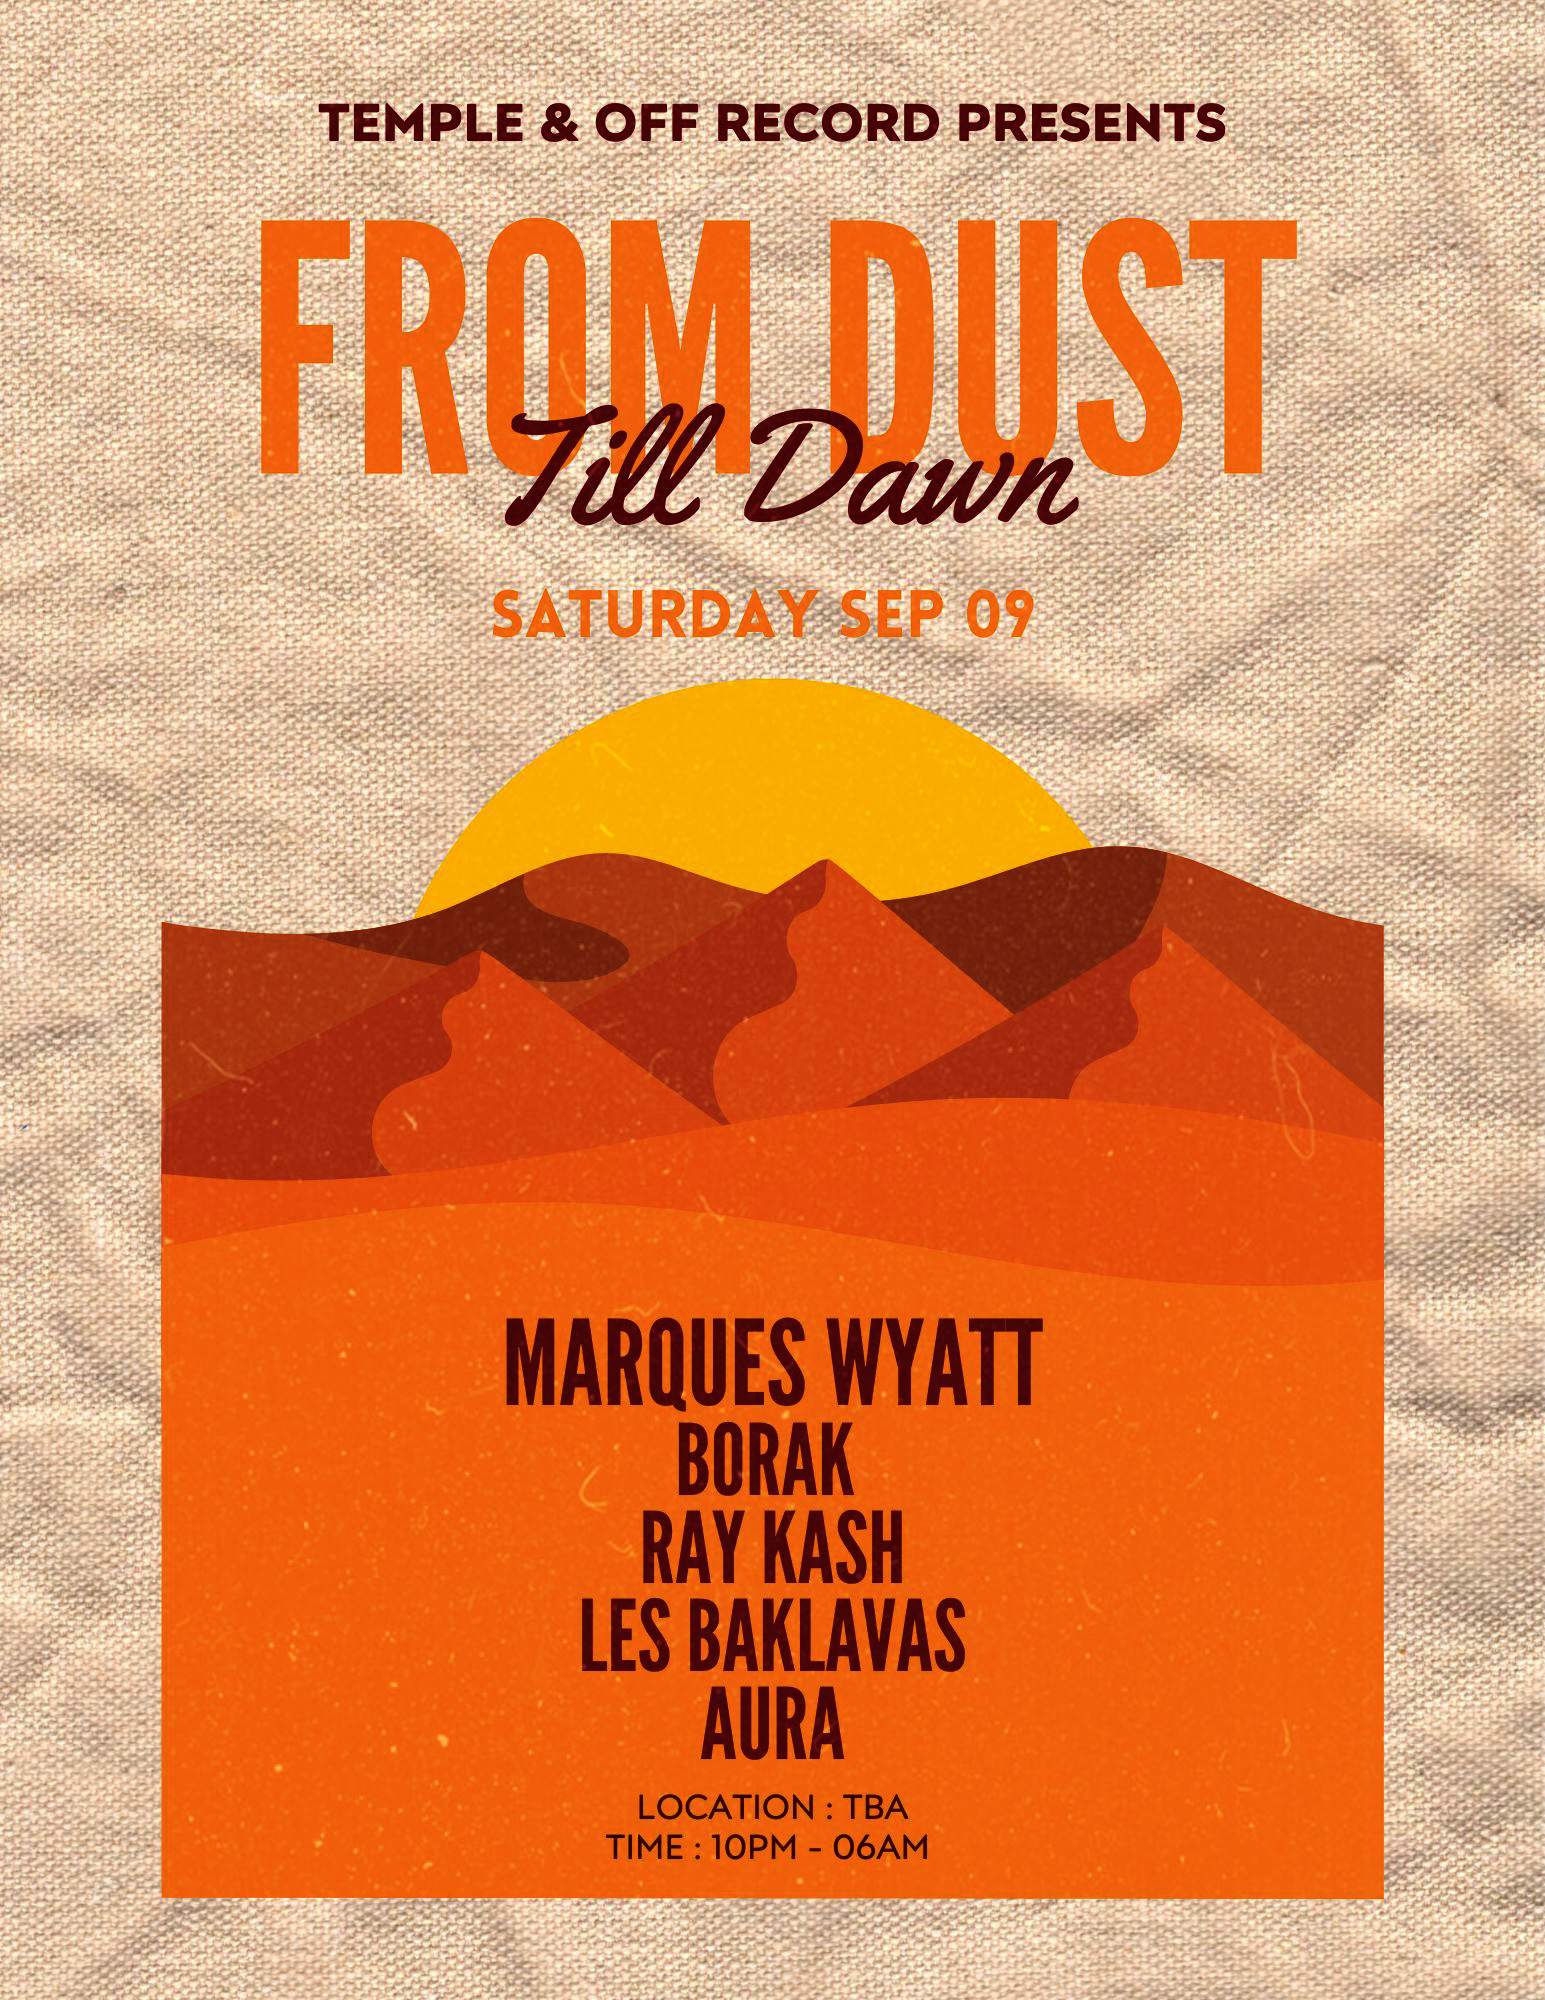 Temple & Off Record presents: From Dust Till Dawn with Marques Wyatt, Borak, Ray Kash - Página frontal